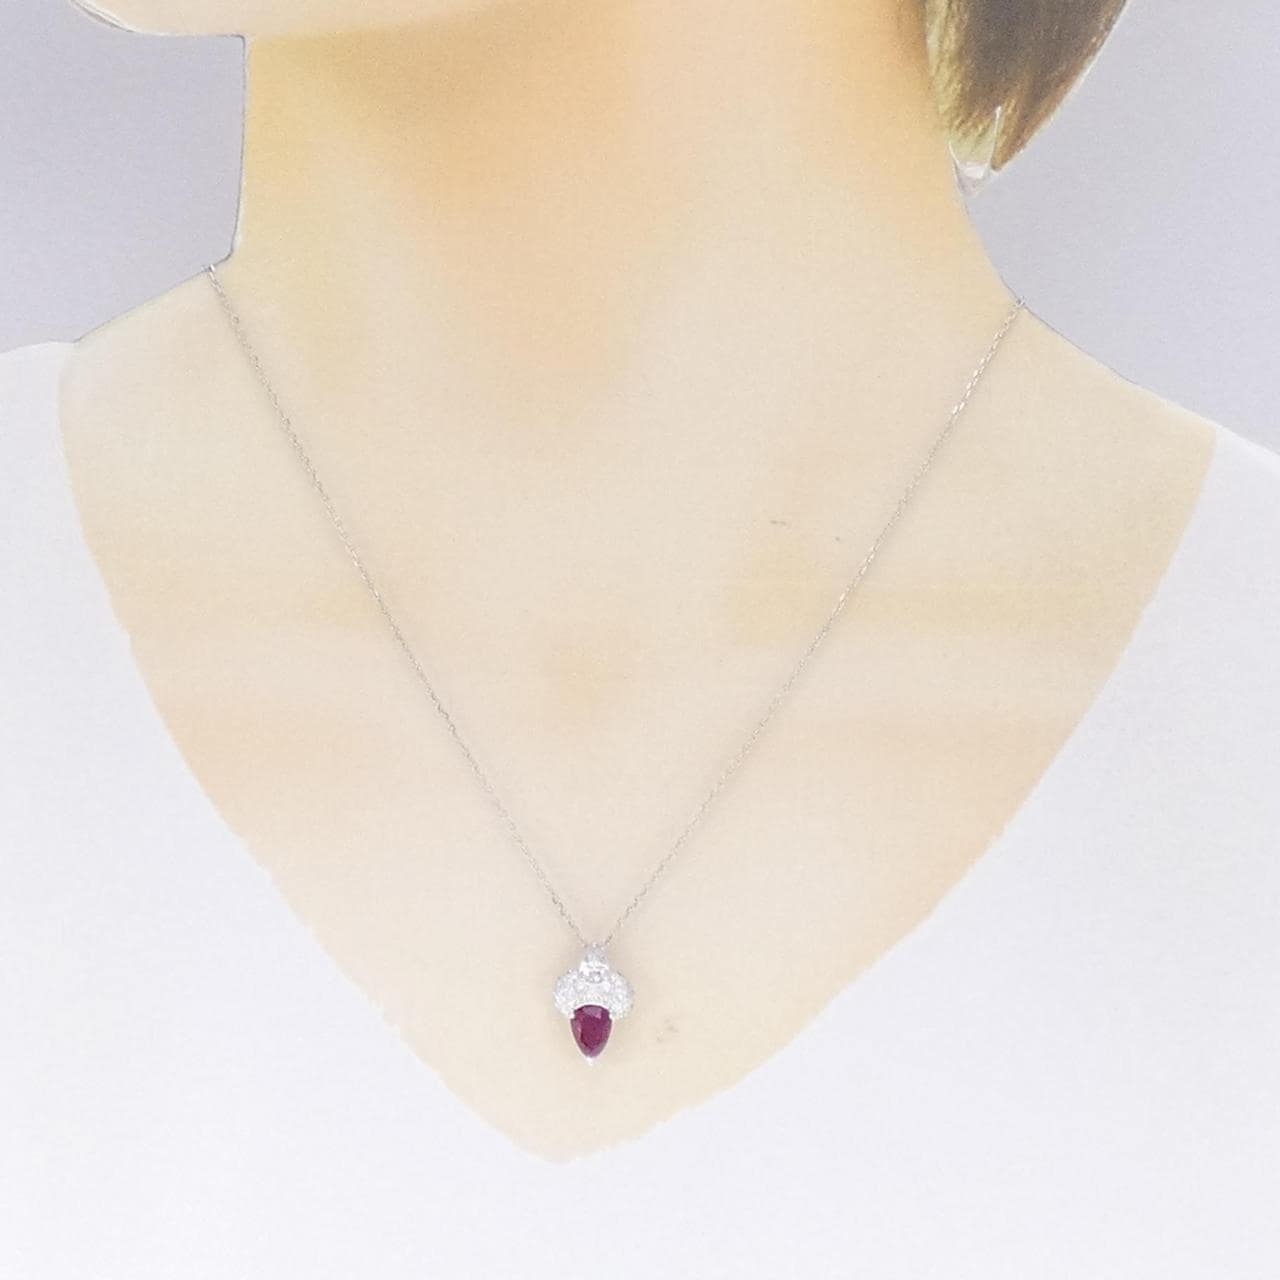 MIKIMOTO Ruby Necklace 1.16CT Made in Burma